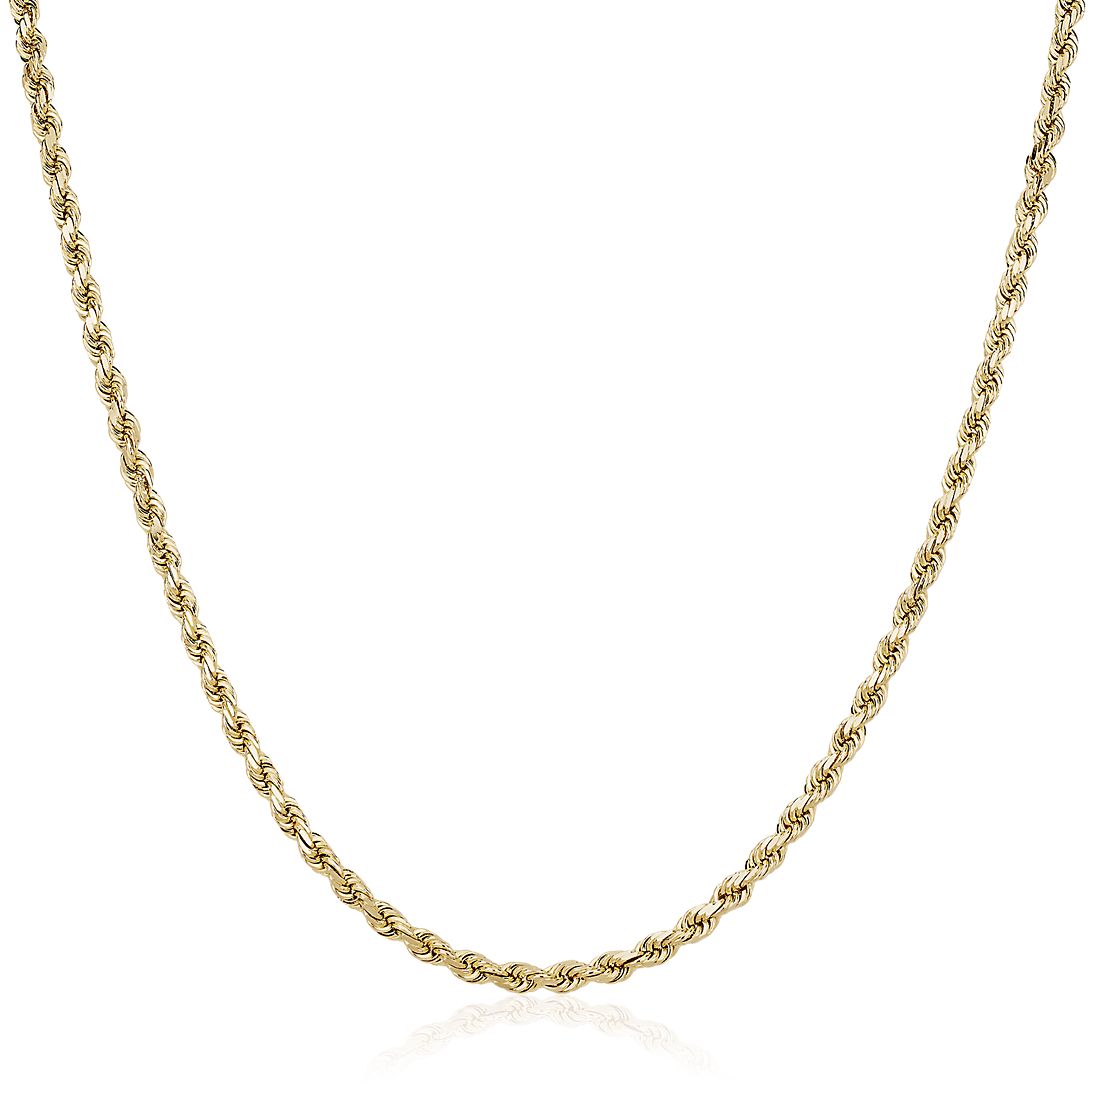 24" Men’s Diamond Cut Rope Necklace​ in 14k Yellow Gold (4mm)